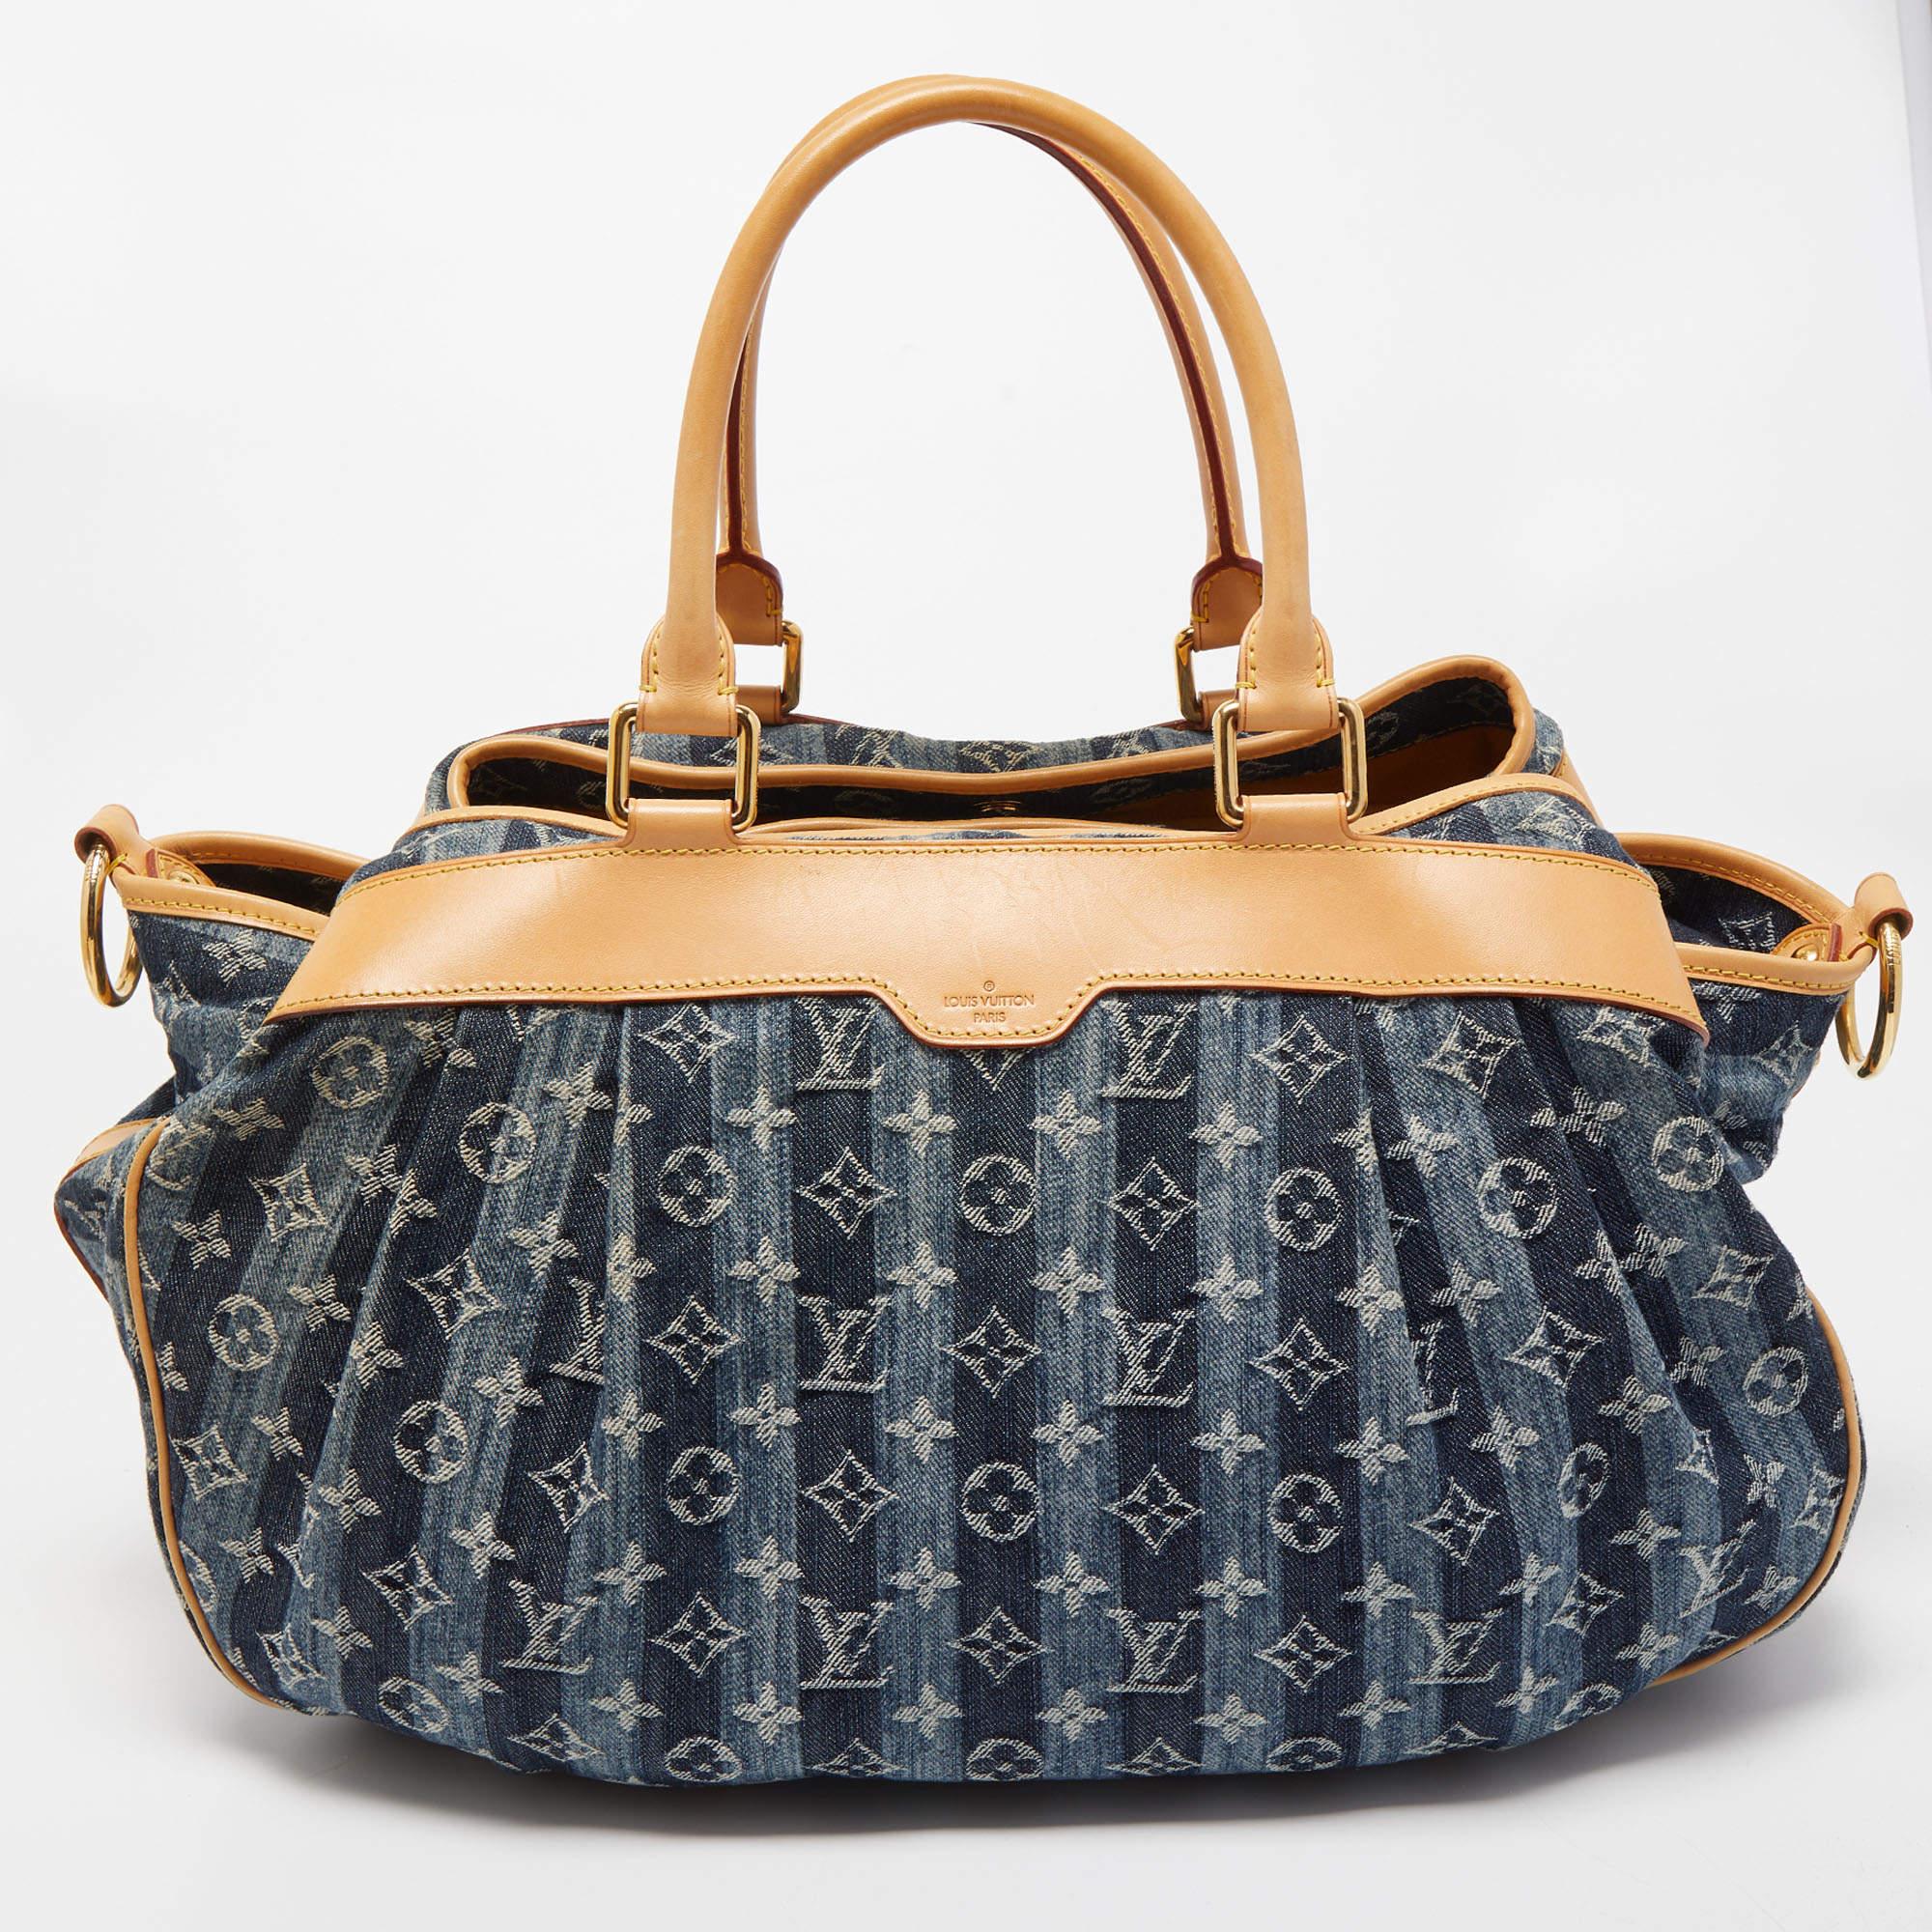 A limited-edition piece, this Porte Epaule Raye GM bag is a prized creation from Louis Vuitton. Highly coveted, the bag carries a stunning shape and a fun appeal. It is crafted from denim fabric and features the iconic Monogram all over, along with